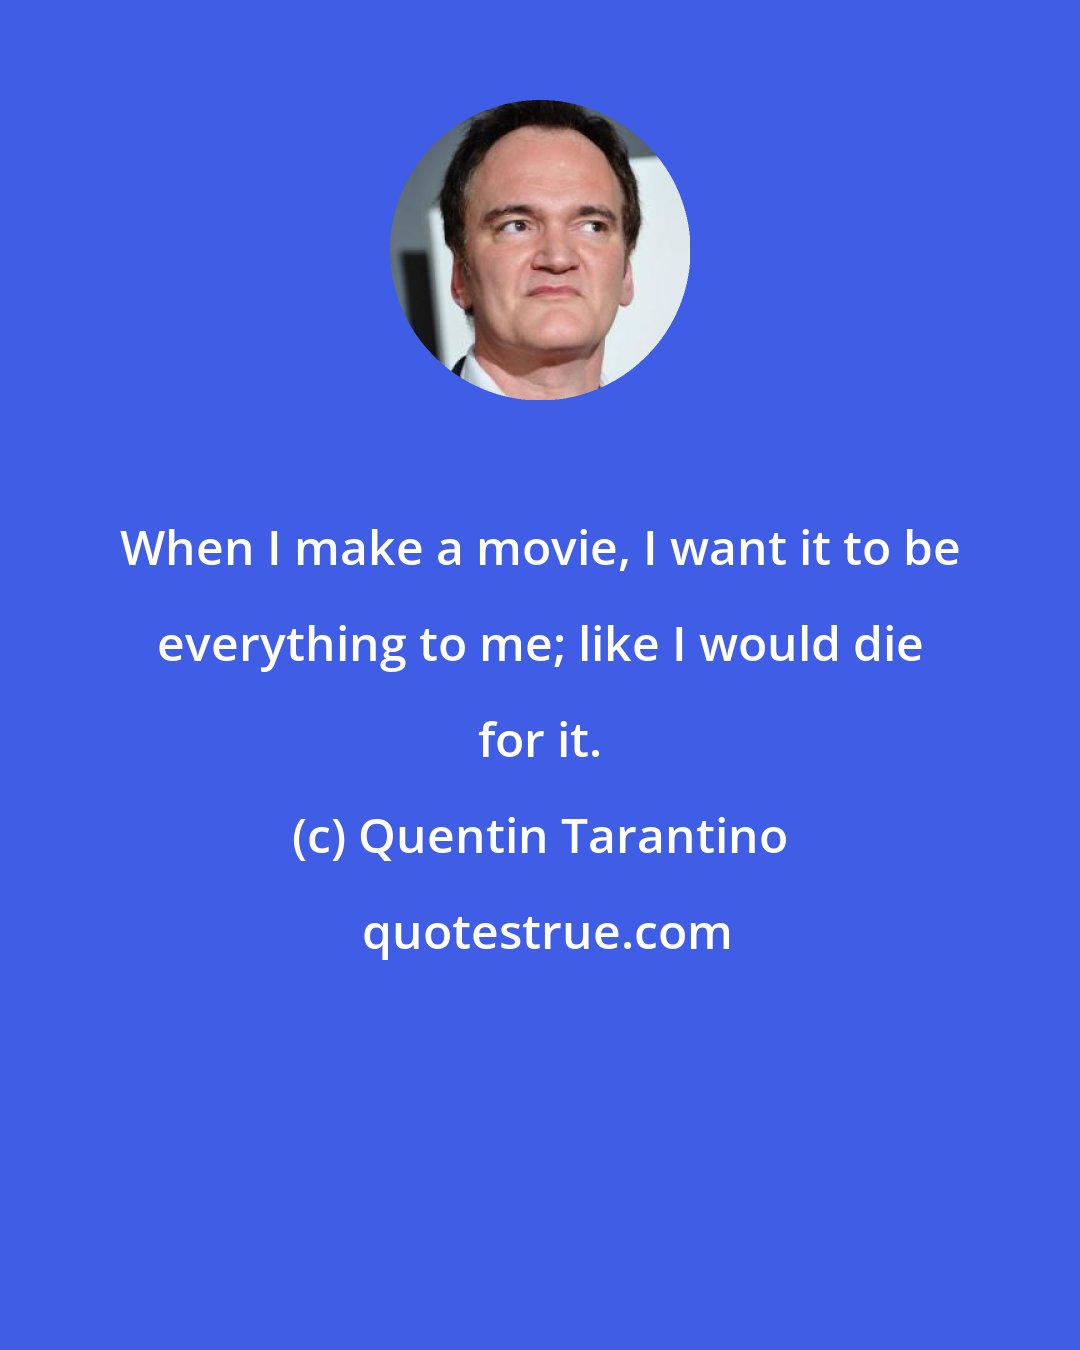 Quentin Tarantino: When I make a movie, I want it to be everything to me; like I would die for it.